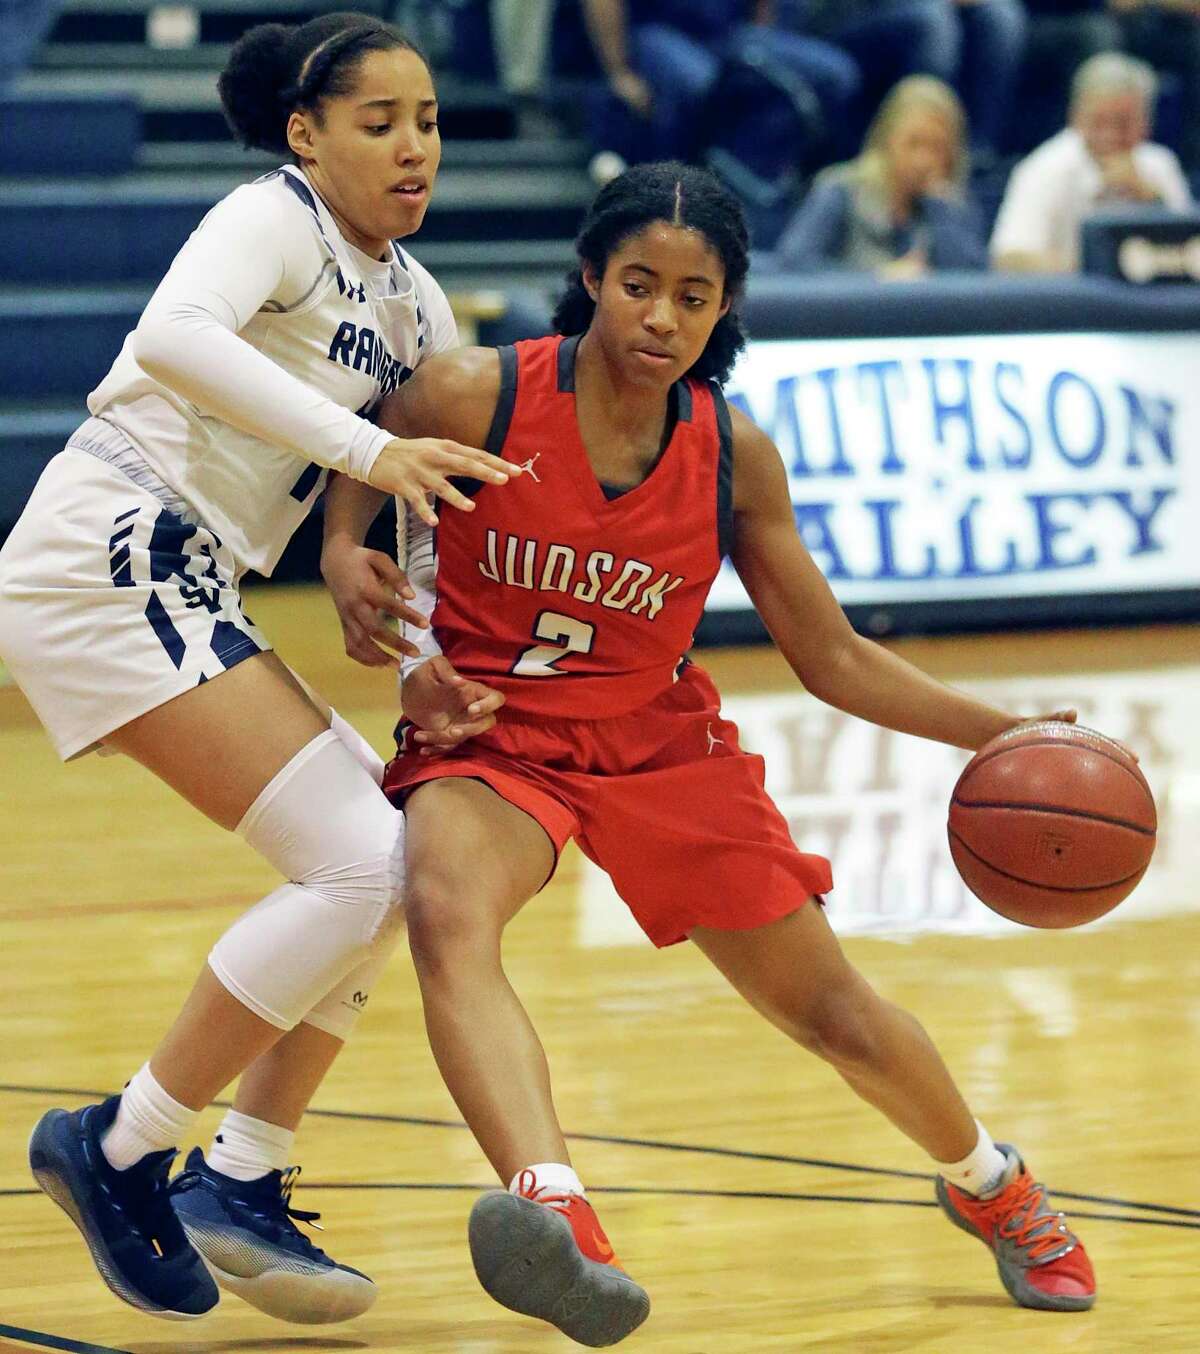 Rocket guard Teanna Huggins moves to the key against Torrie Palomino as the Smithson Valley girls host the Judson Rockets in girls basketball on Jan. 14, 2020.